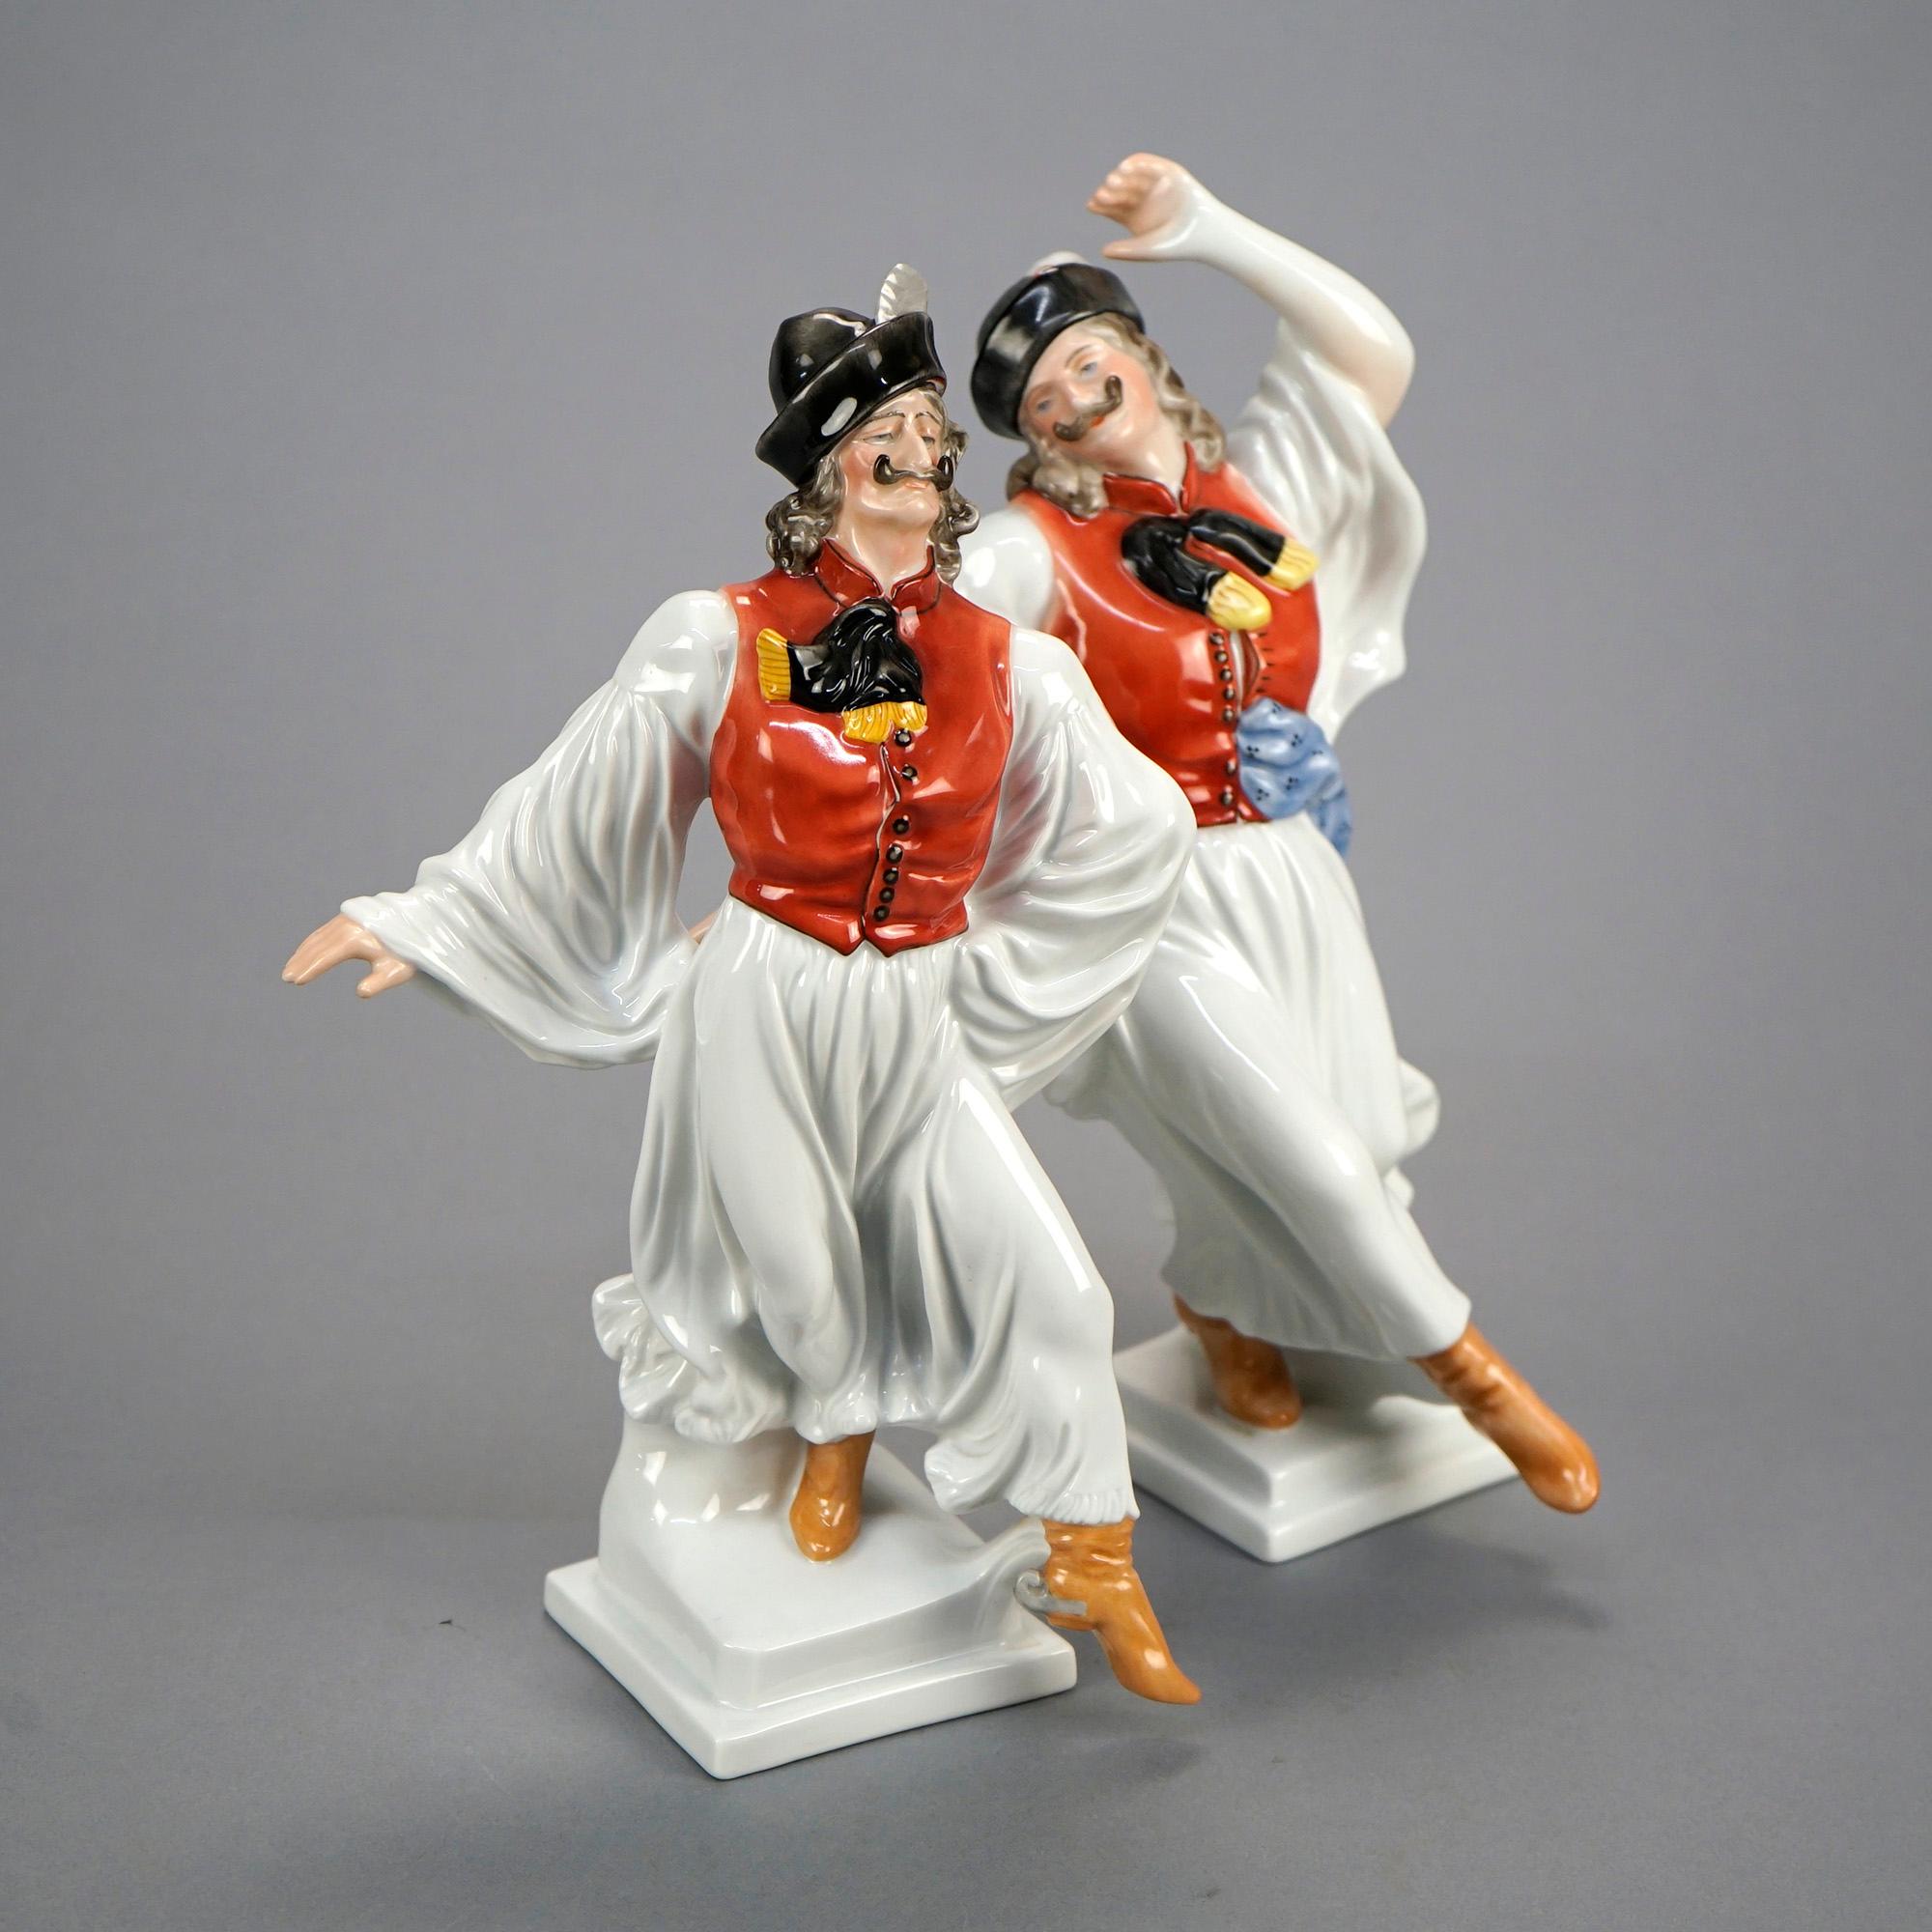 A pair of Herend porcelain figures depict Hungarian folk dancers, maker mark on base as photographed, 20th century

Measures - 12'' H x 8'' W x 5.5'' D; 11.25'' H x 7.5'' W x 5'' D.